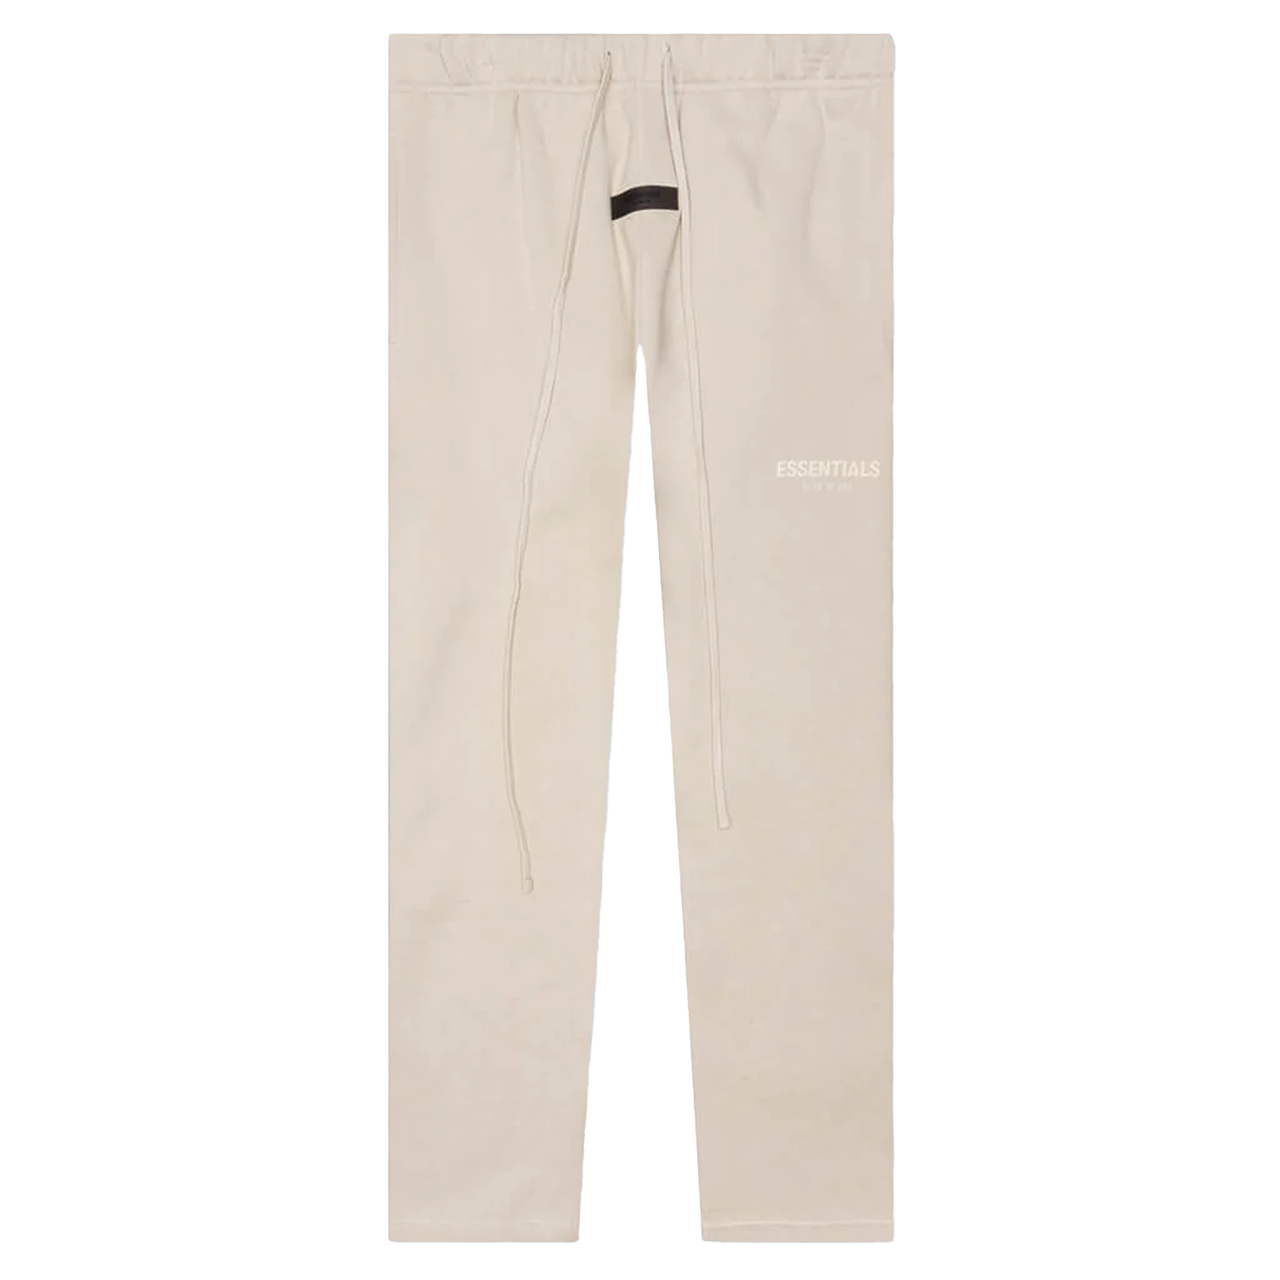 Essentials FW22 Relaxed Sweatpants Wheat